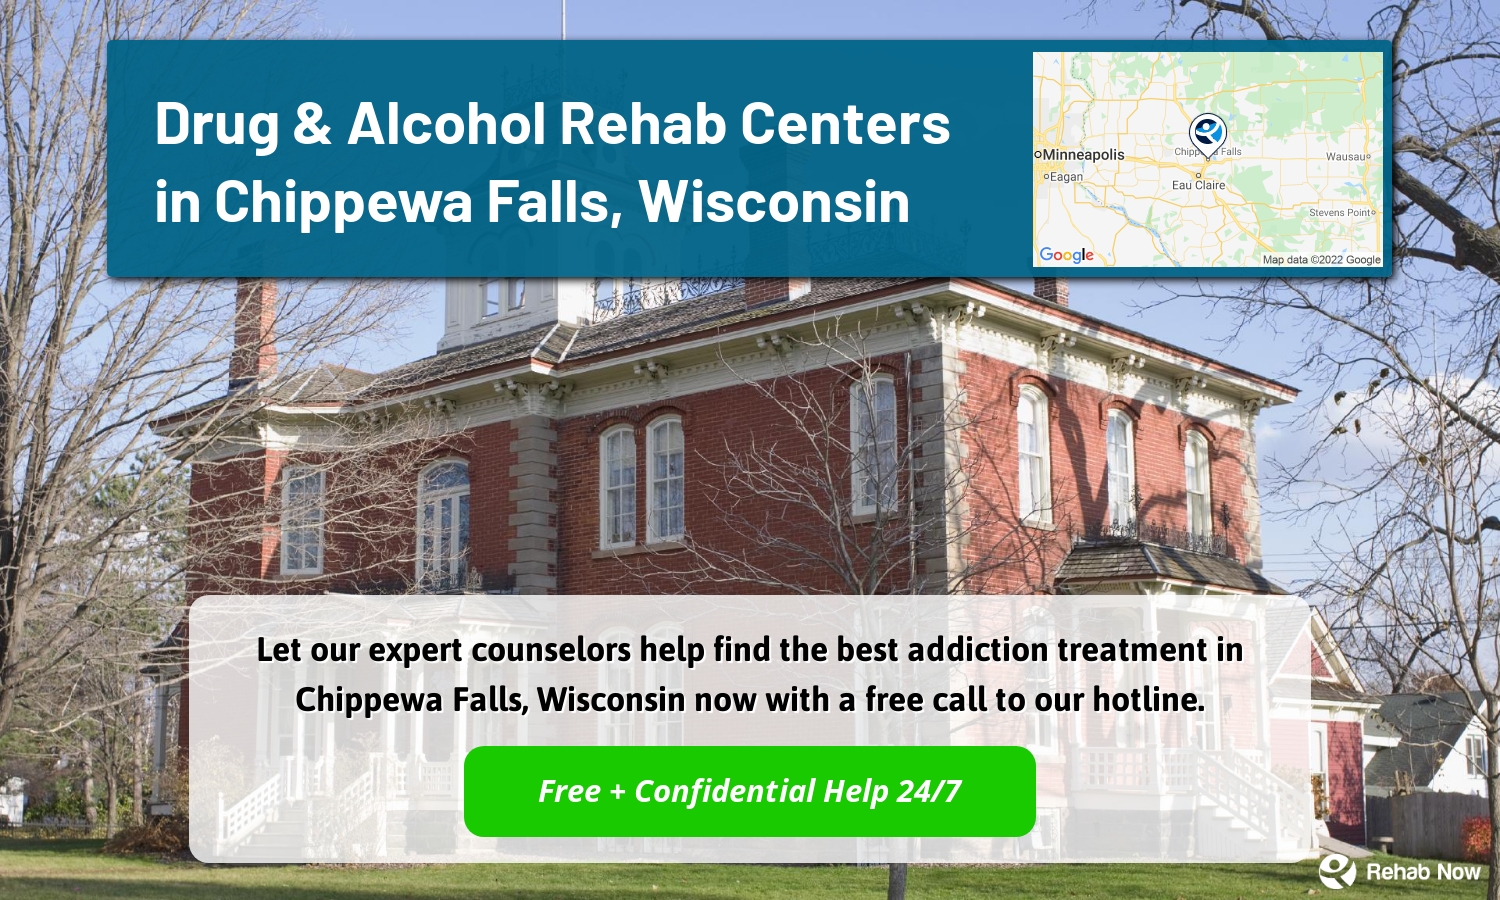 Let our expert counselors help find the best addiction treatment in Chippewa Falls, Wisconsin now with a free call to our hotline.